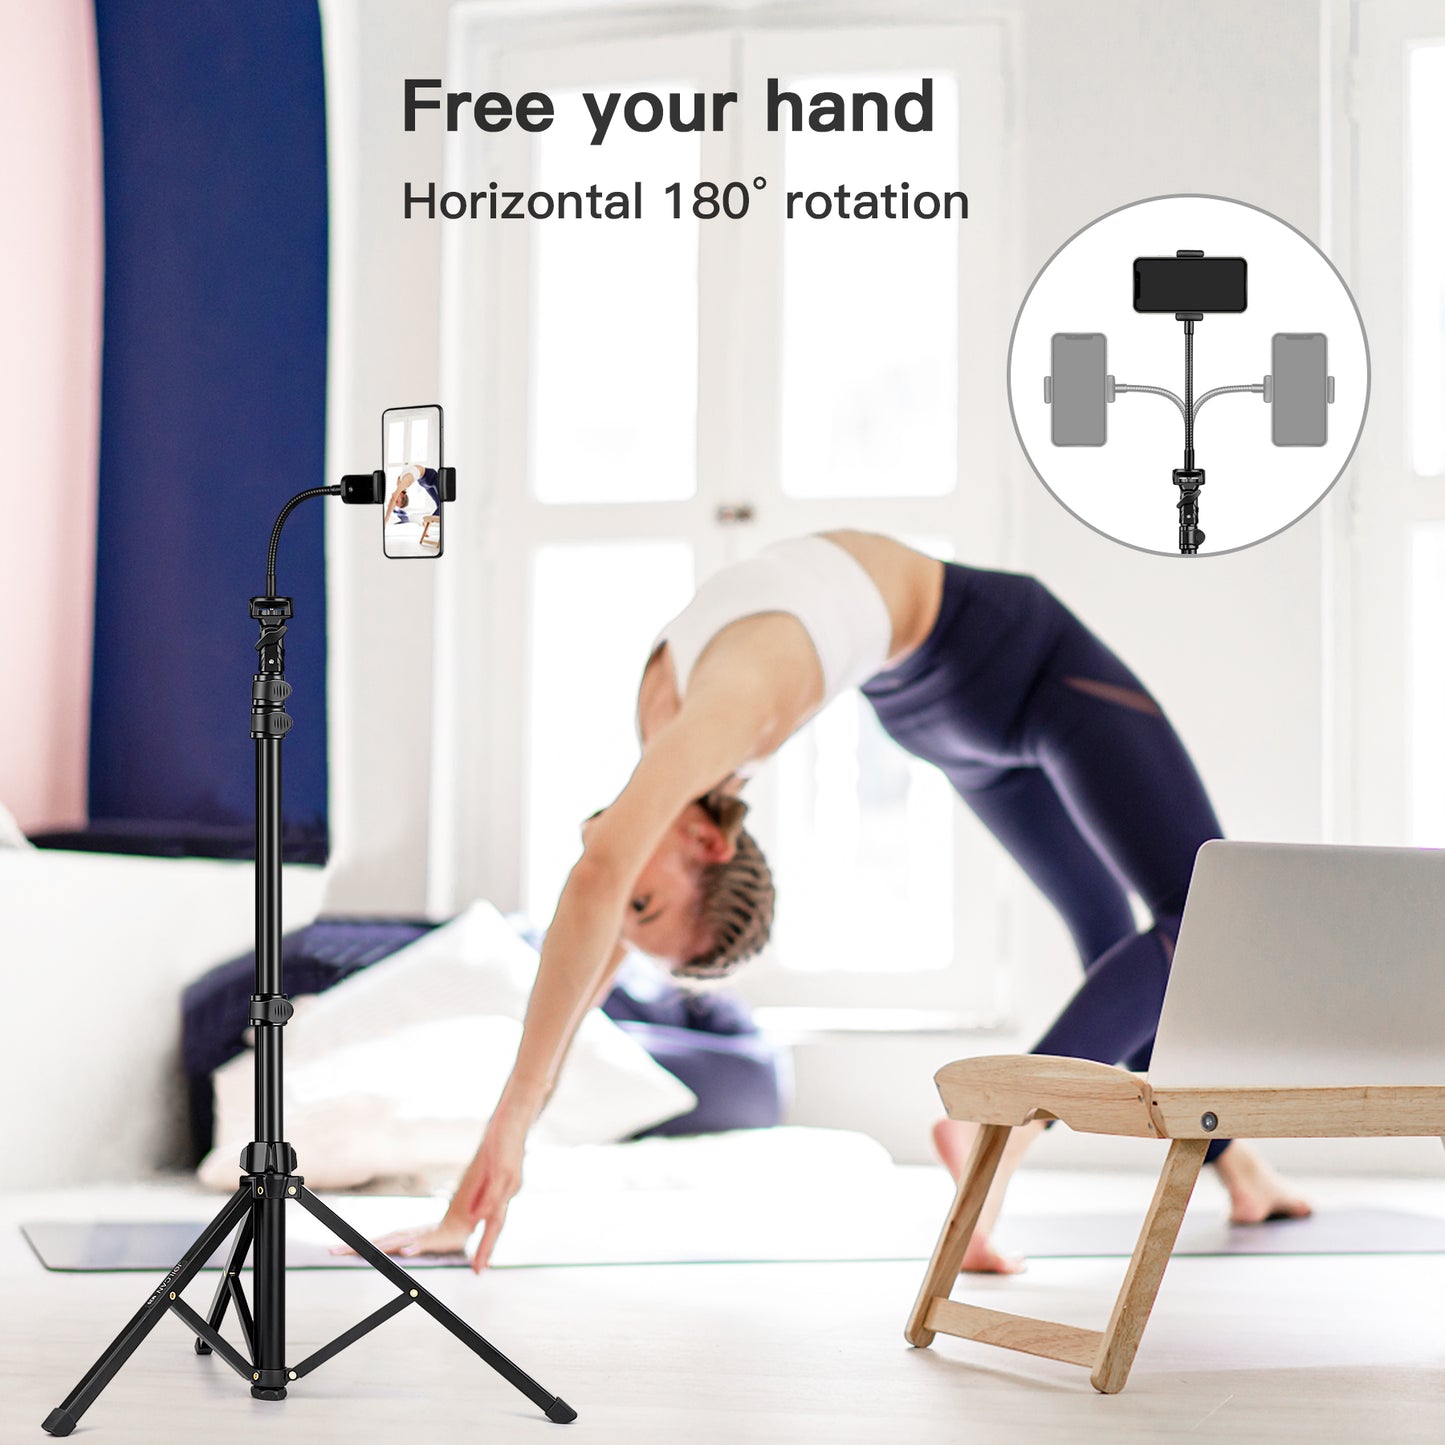 JOILCAN Phone Tripod Stand for Smartphone, Gooseneck Aluminum Mobile Phone Tripod for iPhone, Selfie Stick Tripod with Remote Control & Phone Holder for iPhone 14/13/12/11, Action Camera(EU)